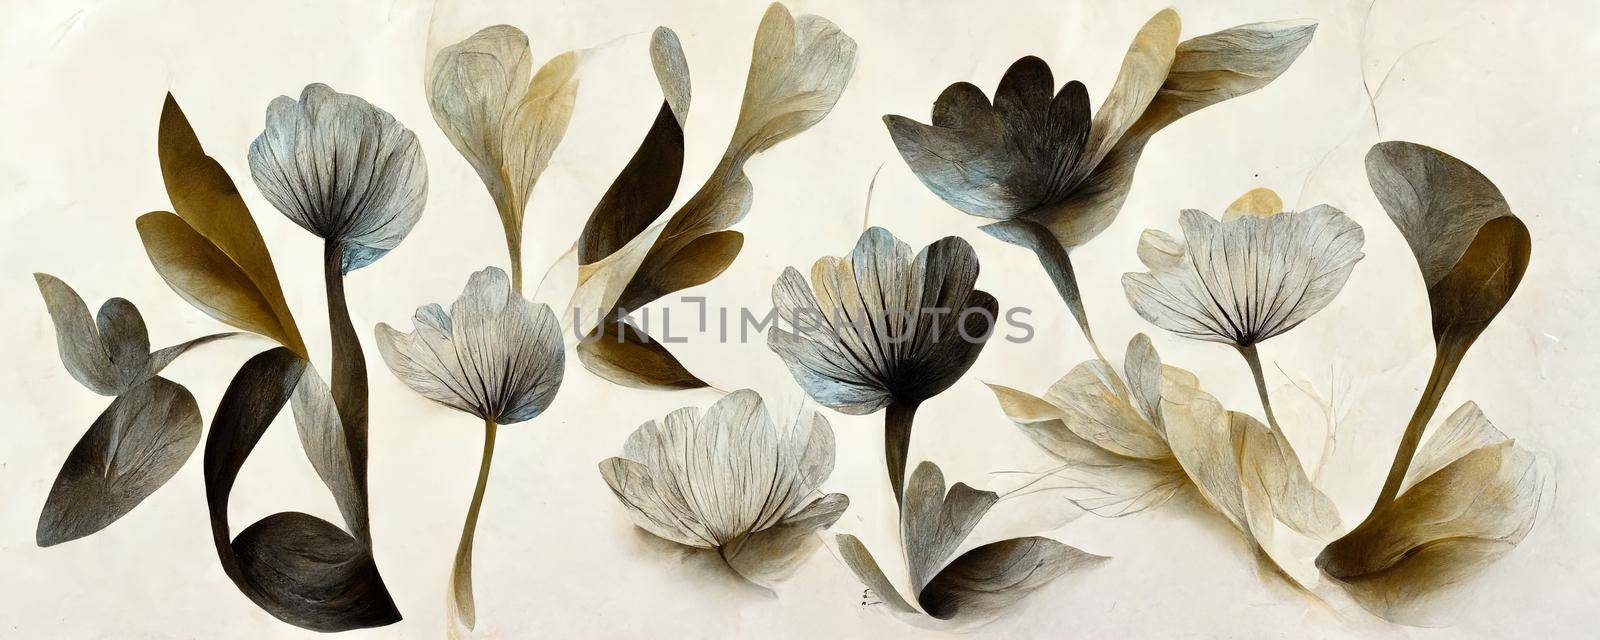 abstract flower illustration, creative flower background, Botanical art by TRMK